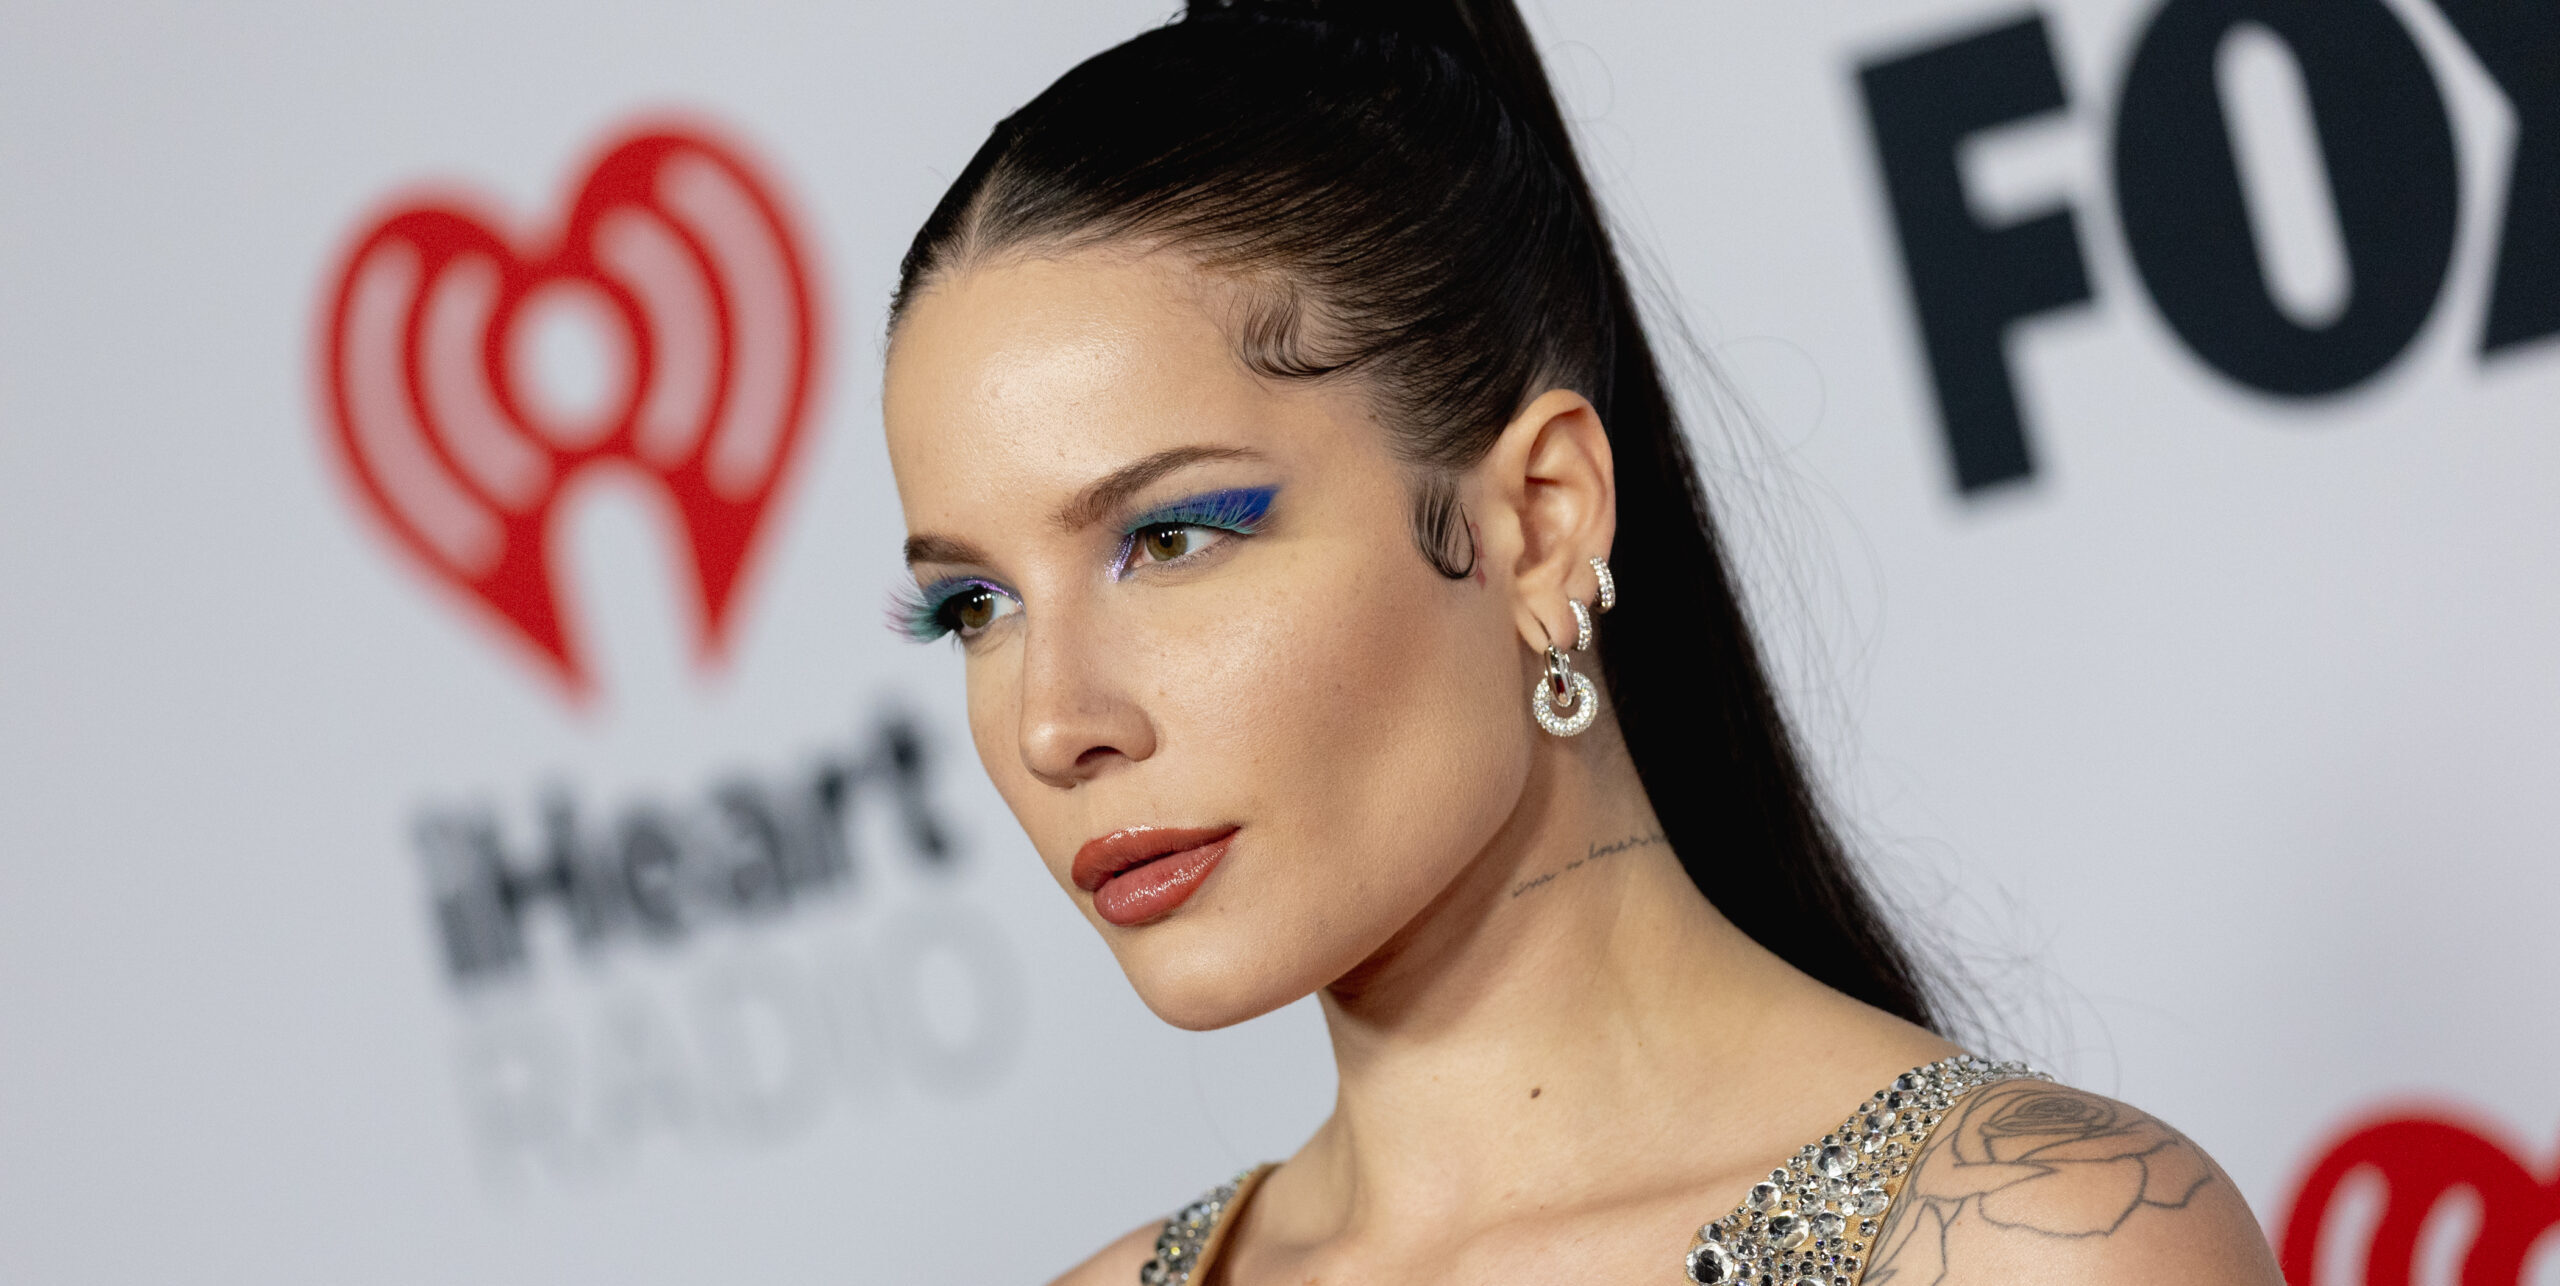 Halsey Reveals Chronic Illnesses: ‘My Health Has Changed A Lot Since I Got Pregnant’